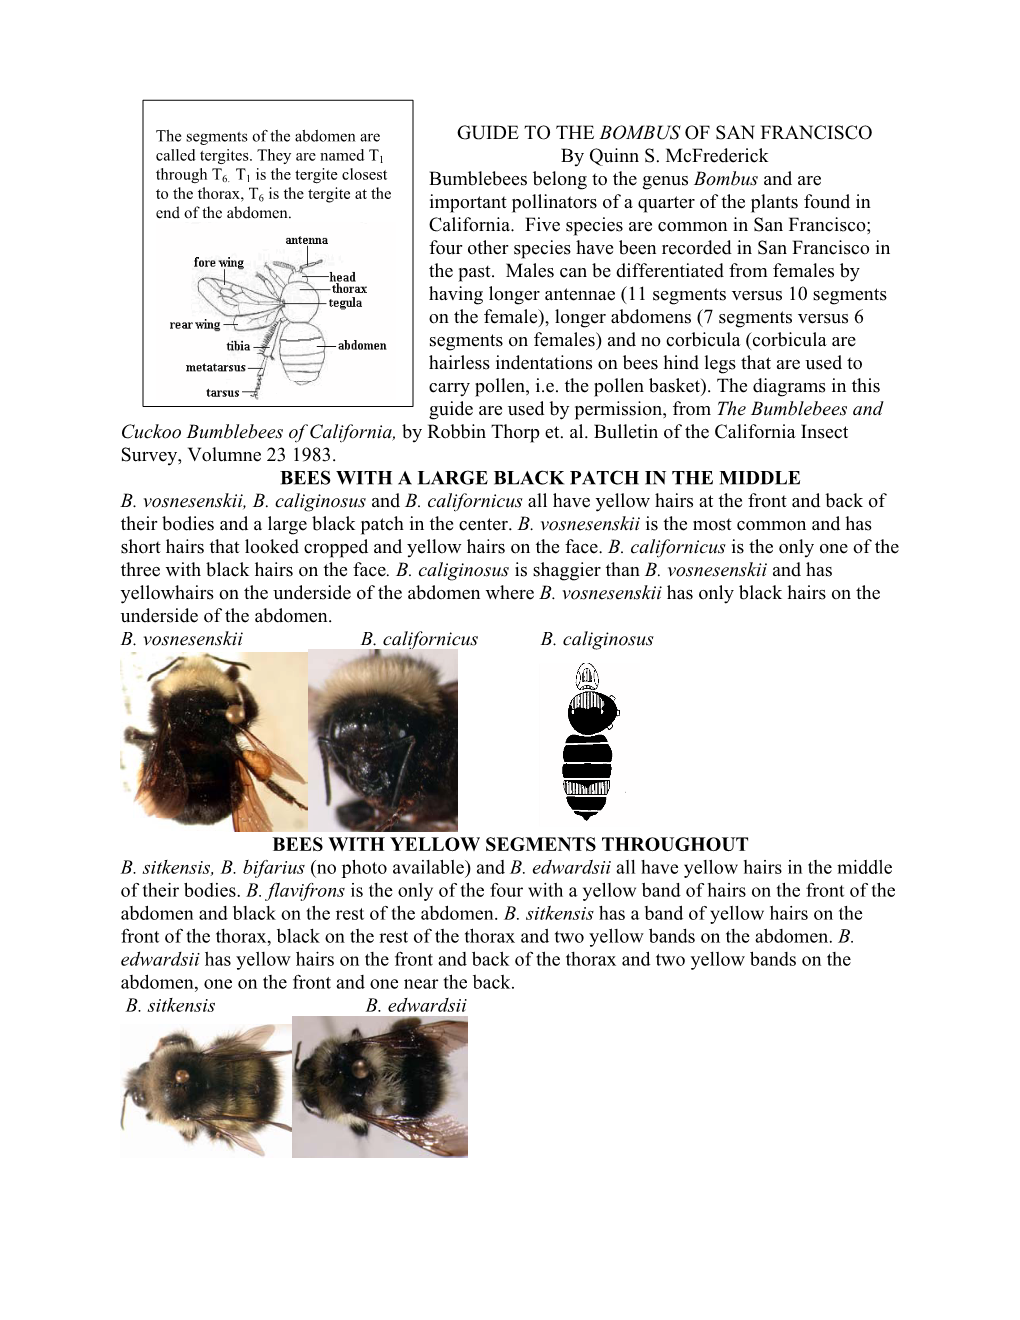 Guide to the Bombus of the Bay Area